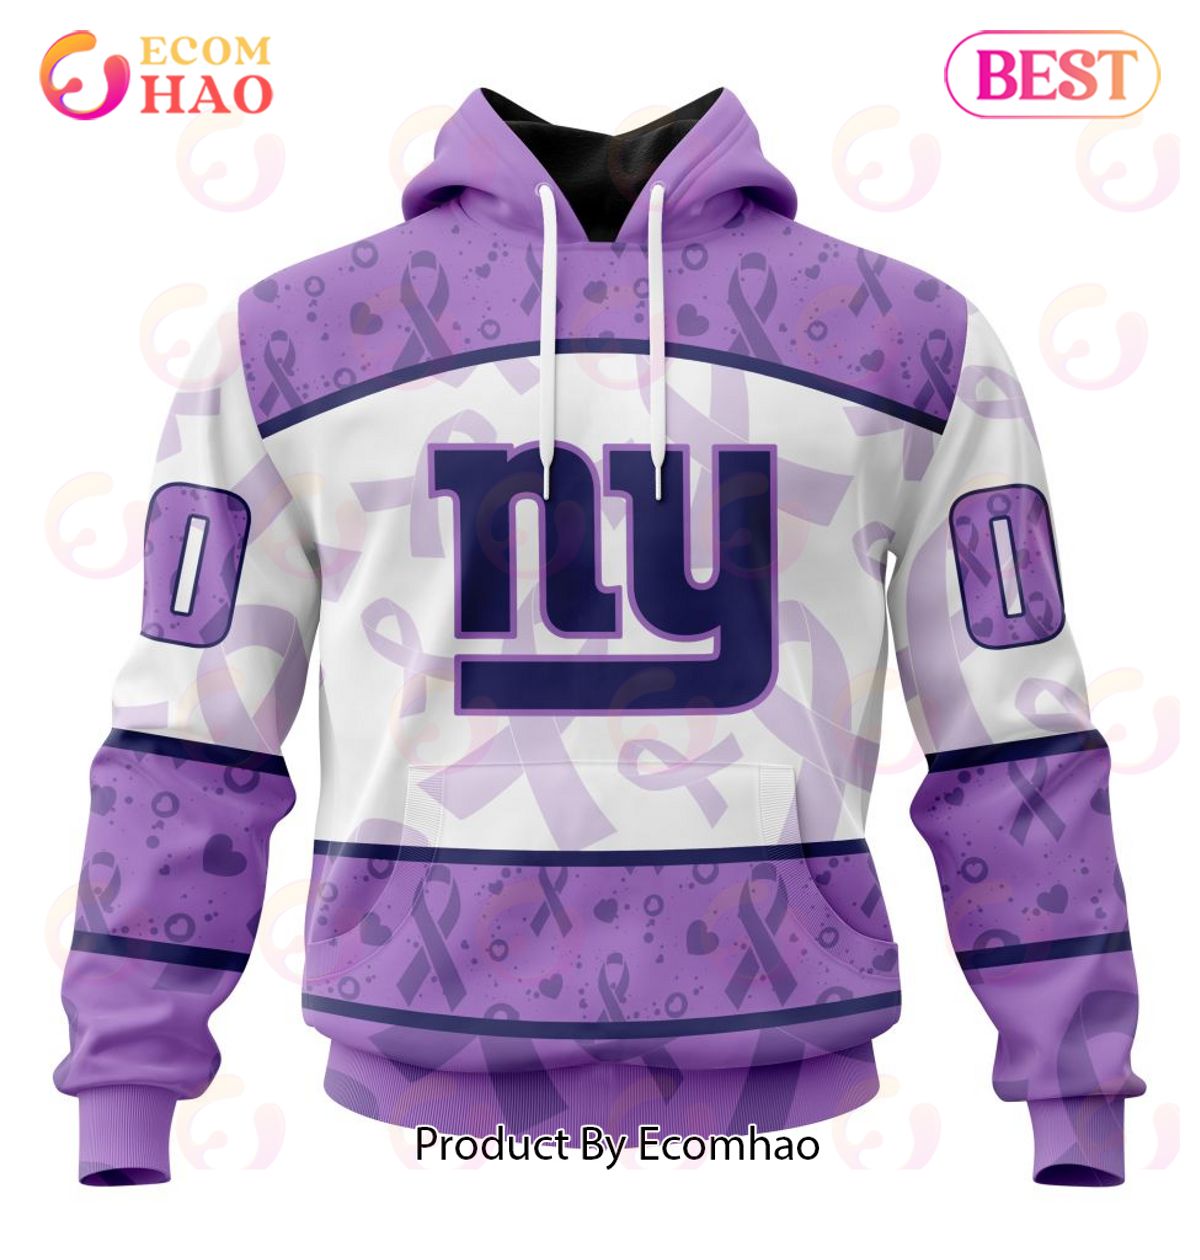 NFL New York Giants Special Lavender Fight Cancer 3D Hoodie